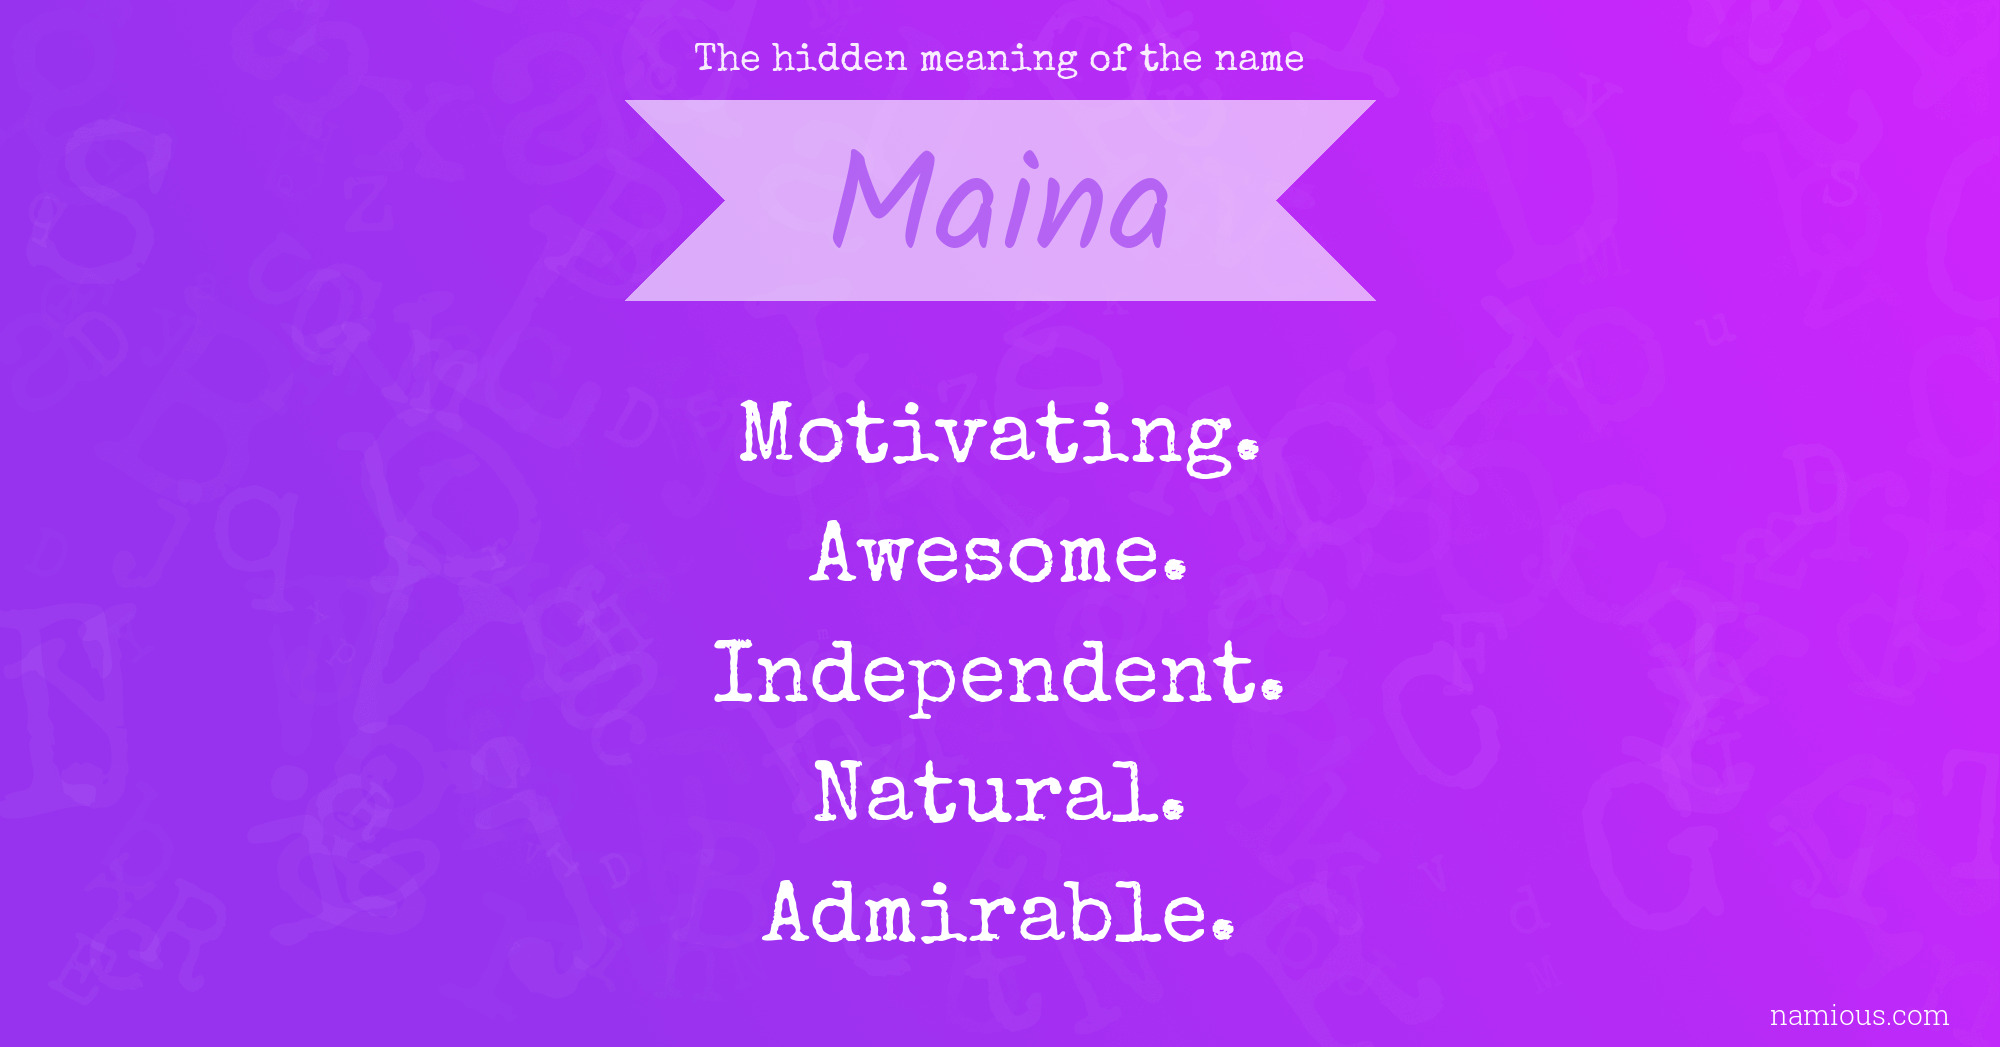 The hidden meaning of the name Maina